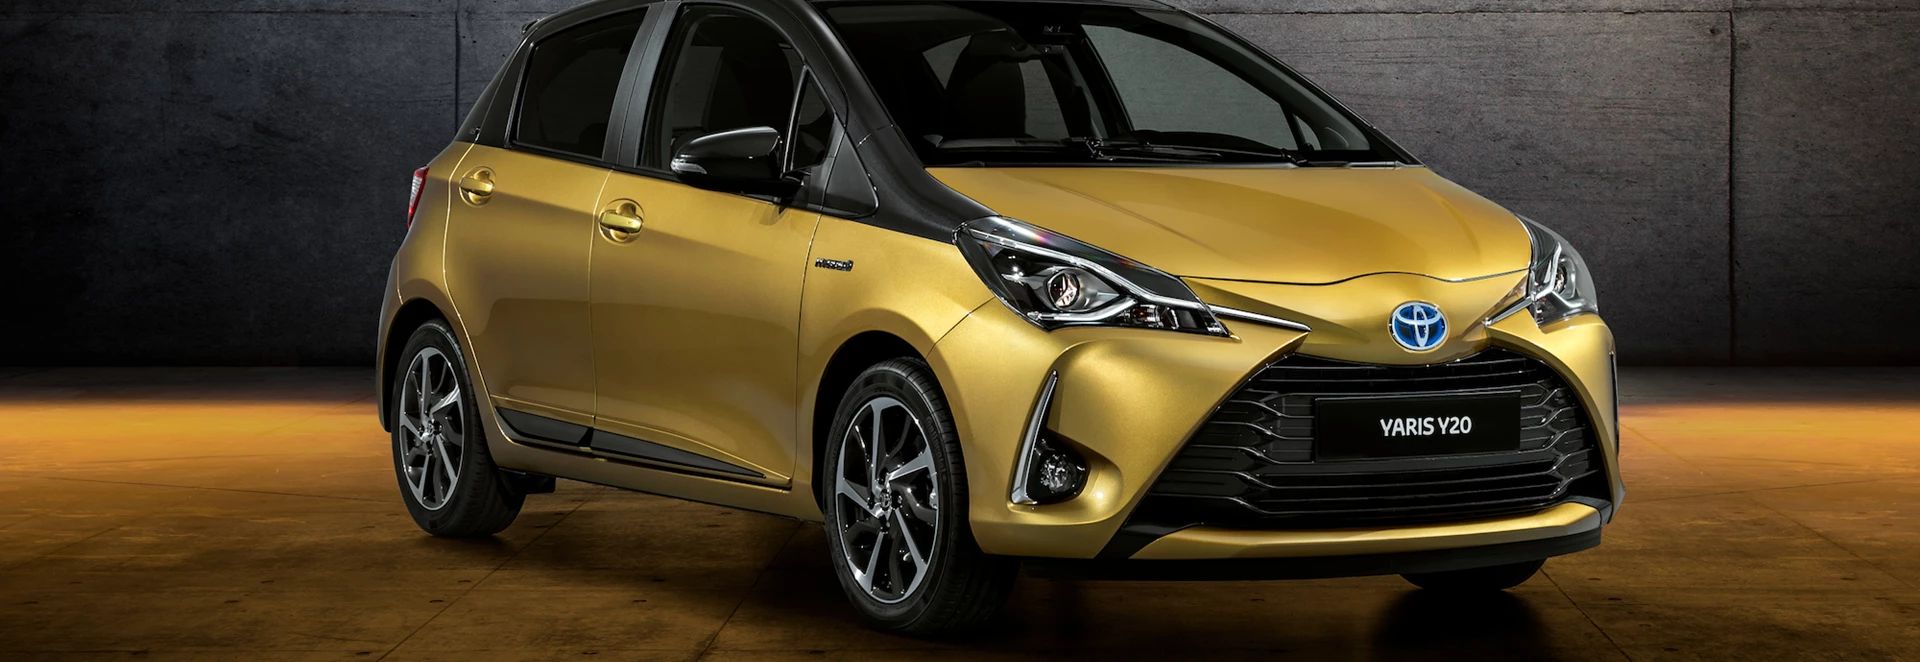 Toyota celebrates Yaris’ 20th anniversary with limited-run model